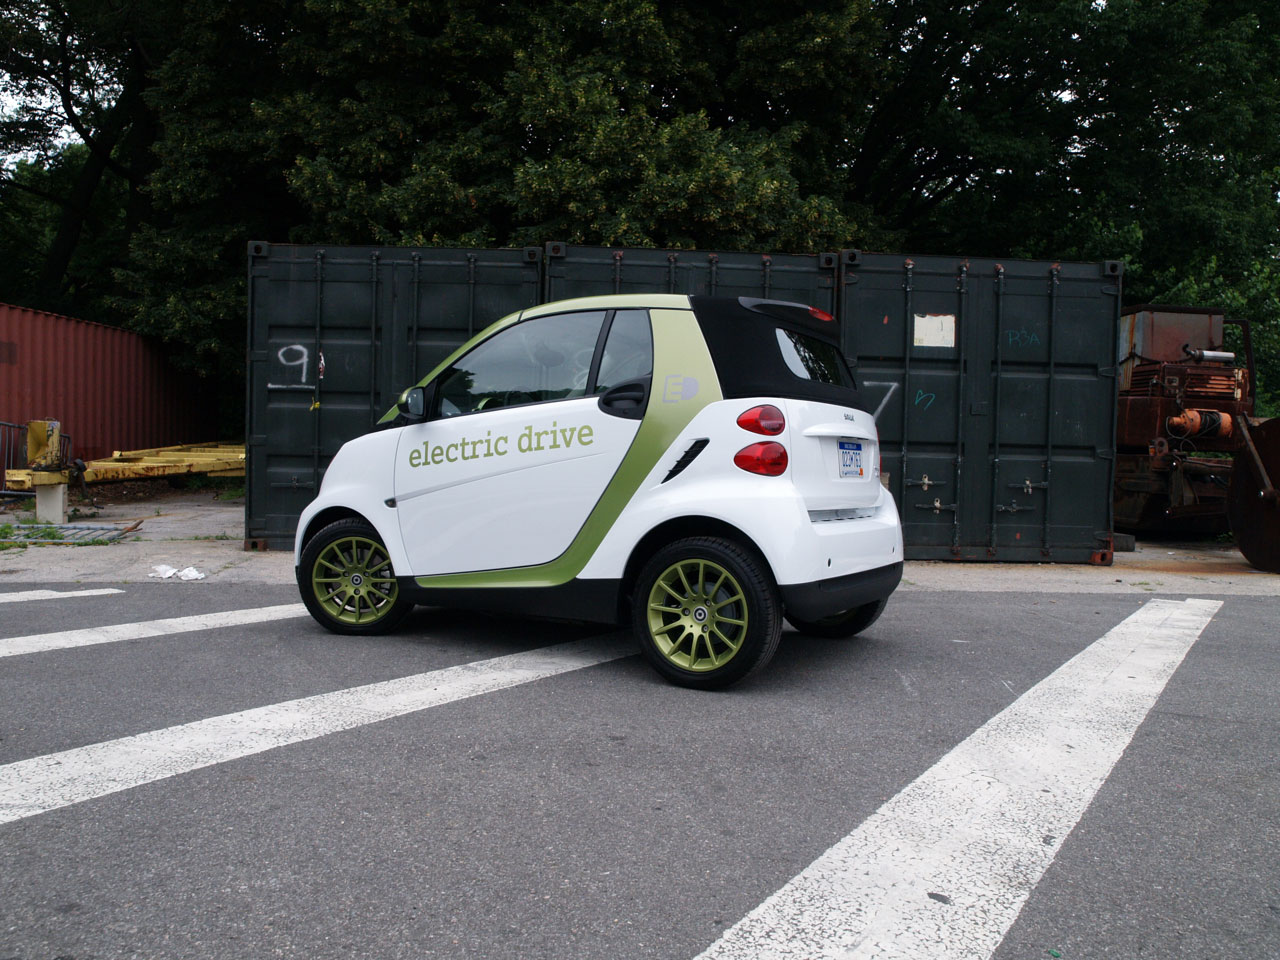 2012 Smart ForTwo Electric Drive